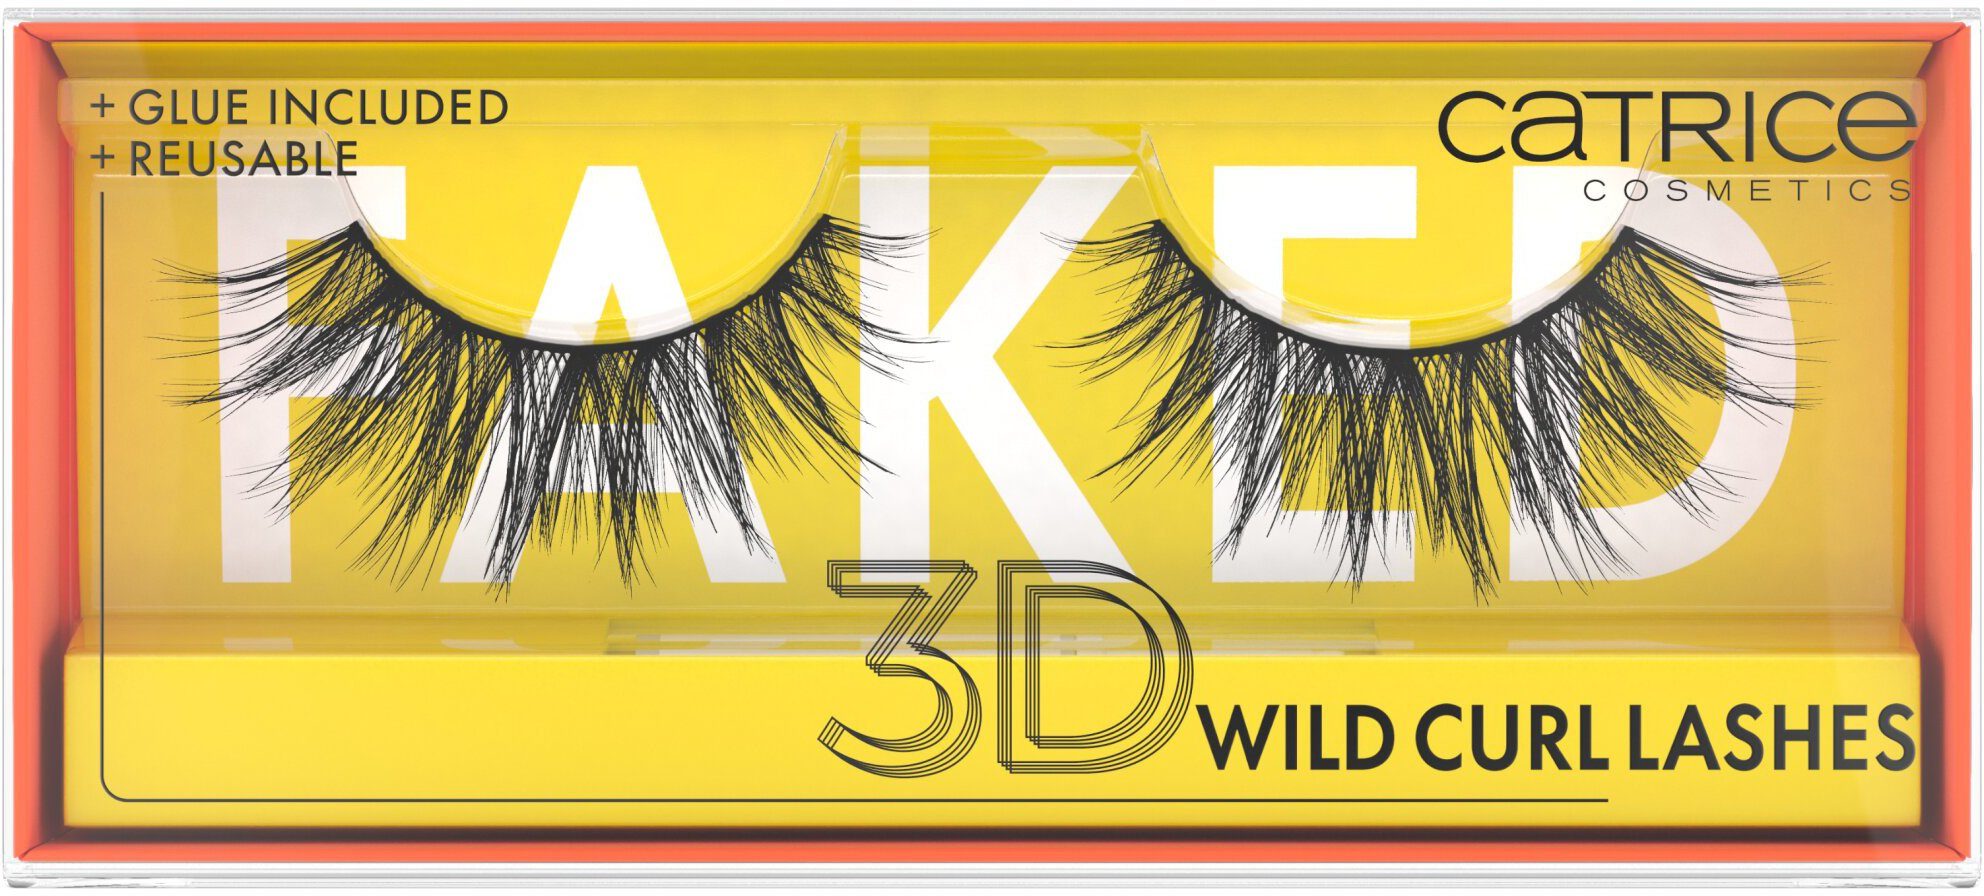 Catrice Bandwimpern Faked Curl Wild 3D Lashes, tlg. 3 Set